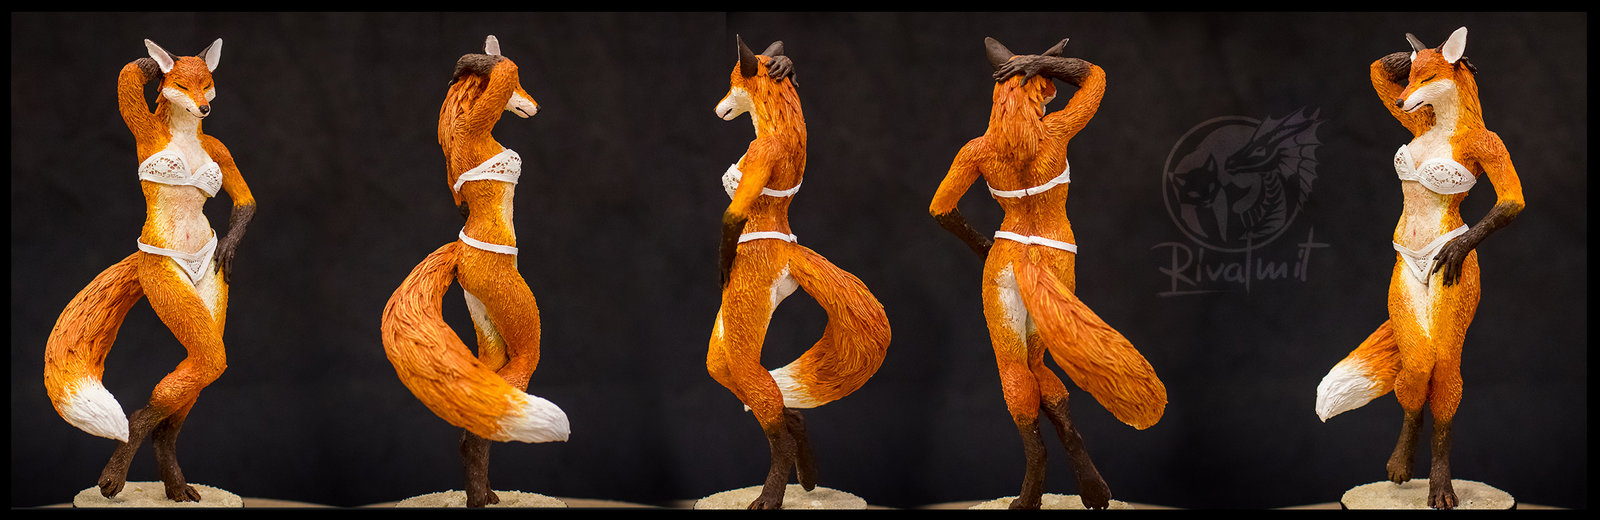 fox nsfw nudity sculpture My eyes are up here  ;)